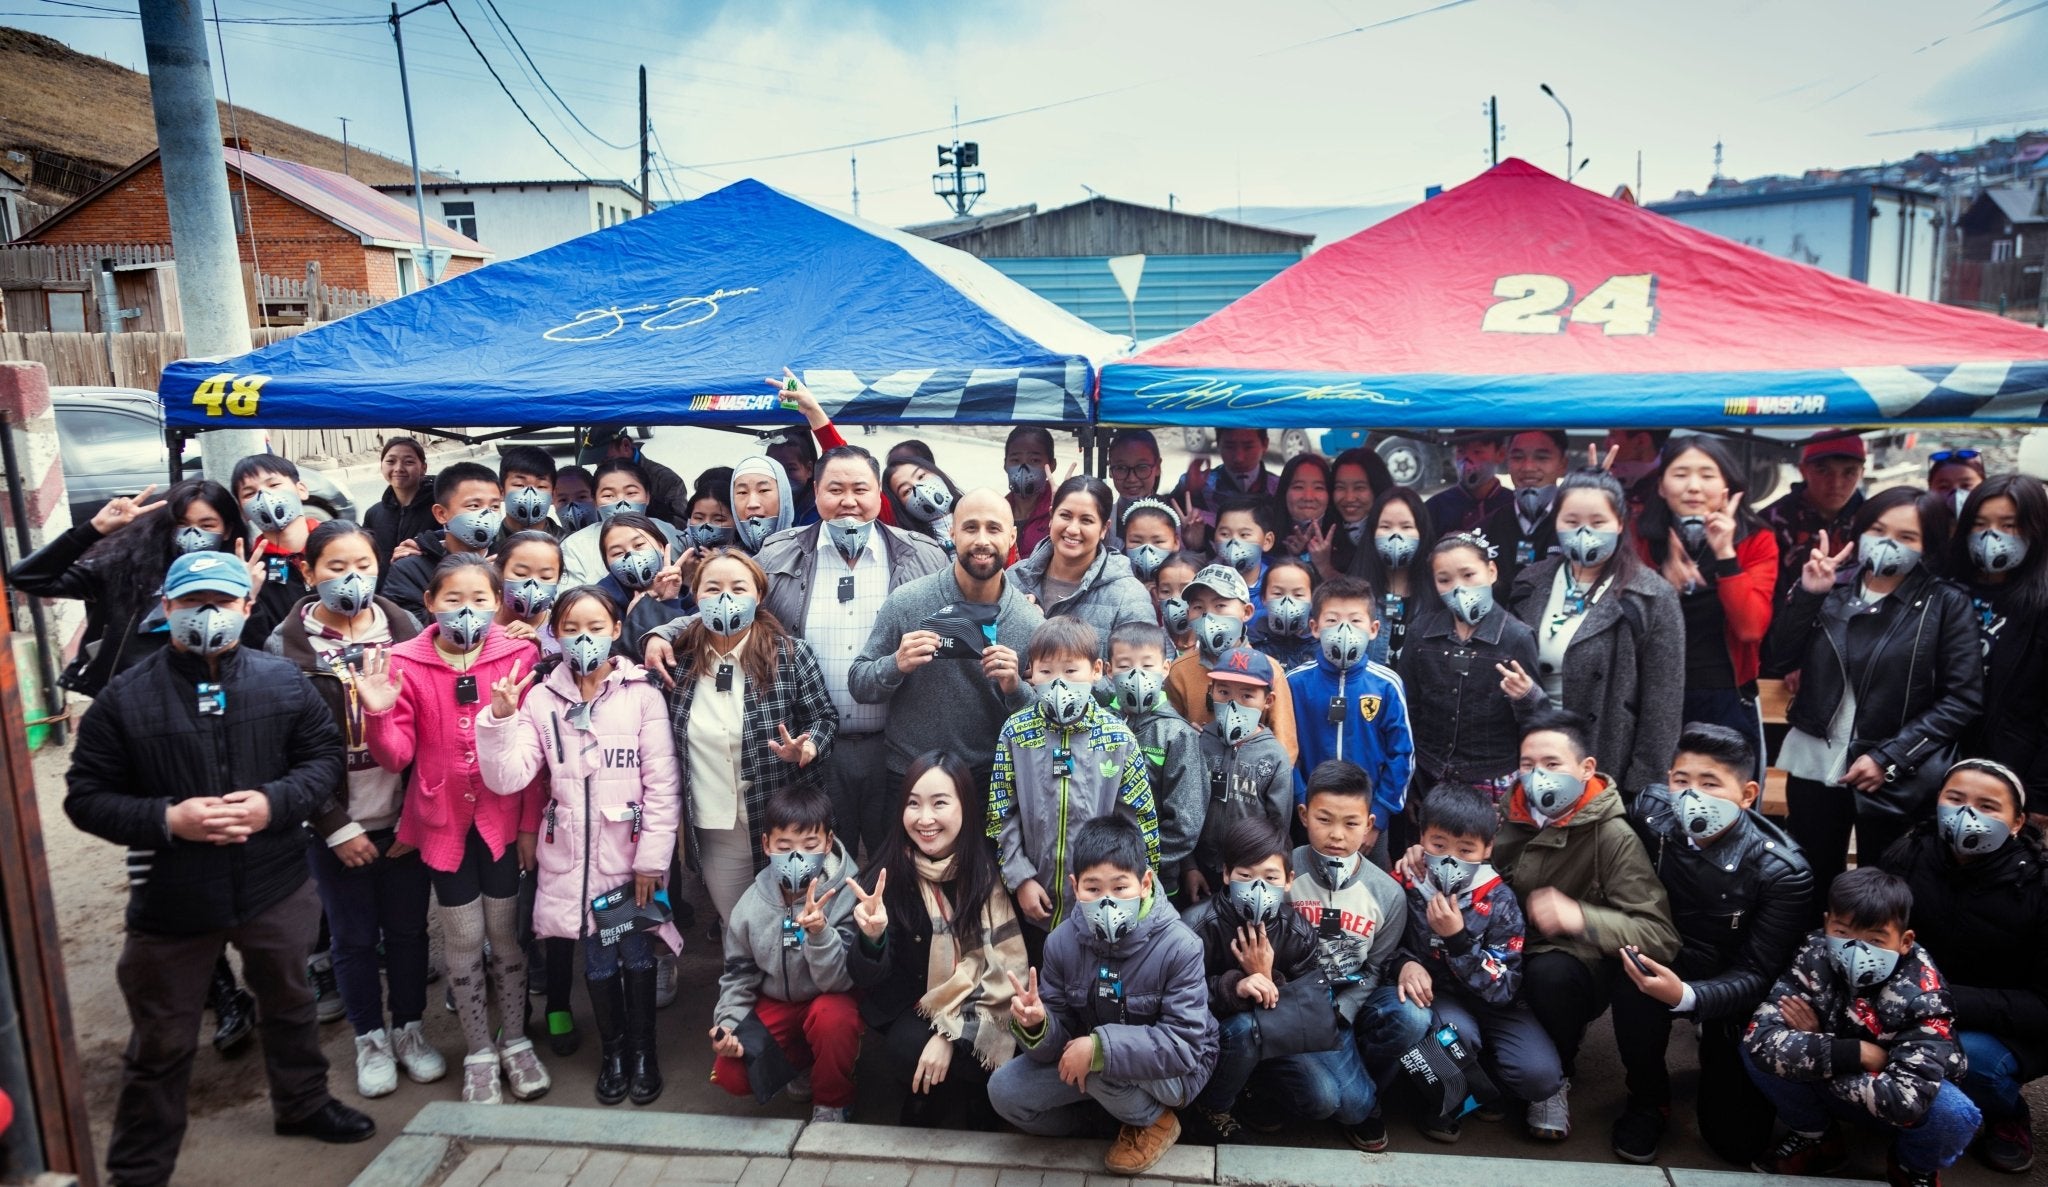 RZ MASK Helps Mongolia with clean air - RZ Mask